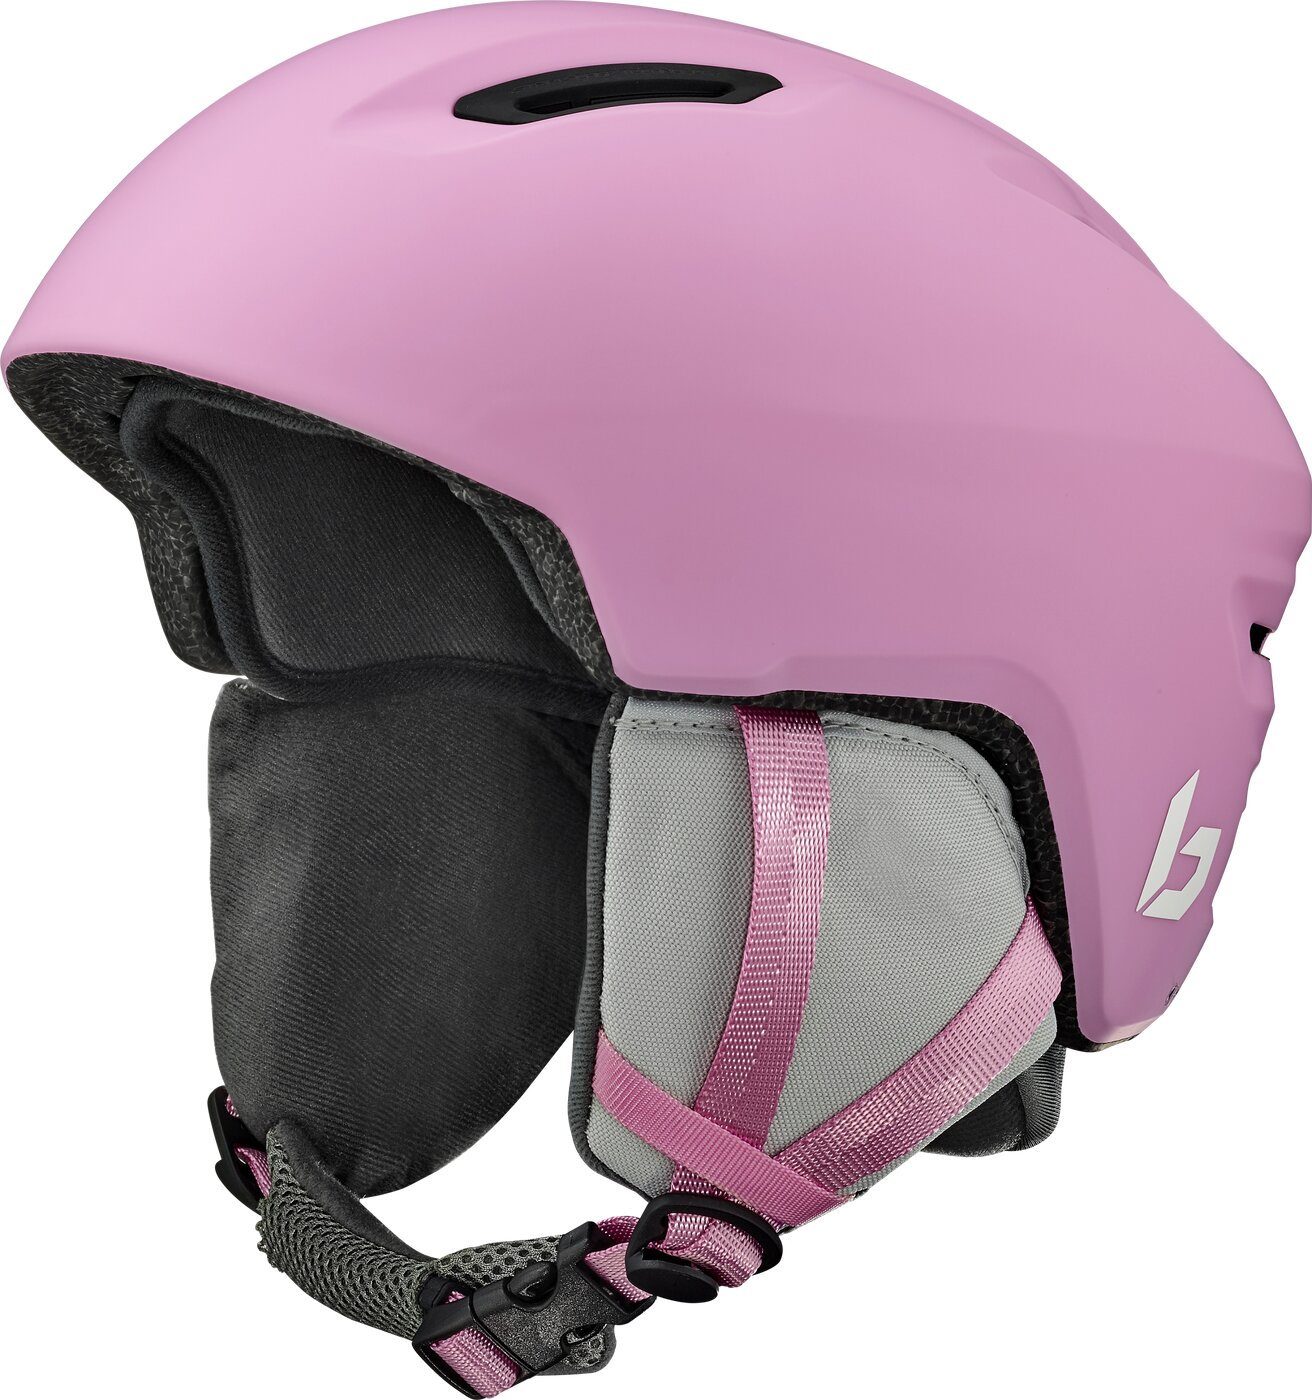 Atmos Skihelm Bolle PINK Youth MATTE